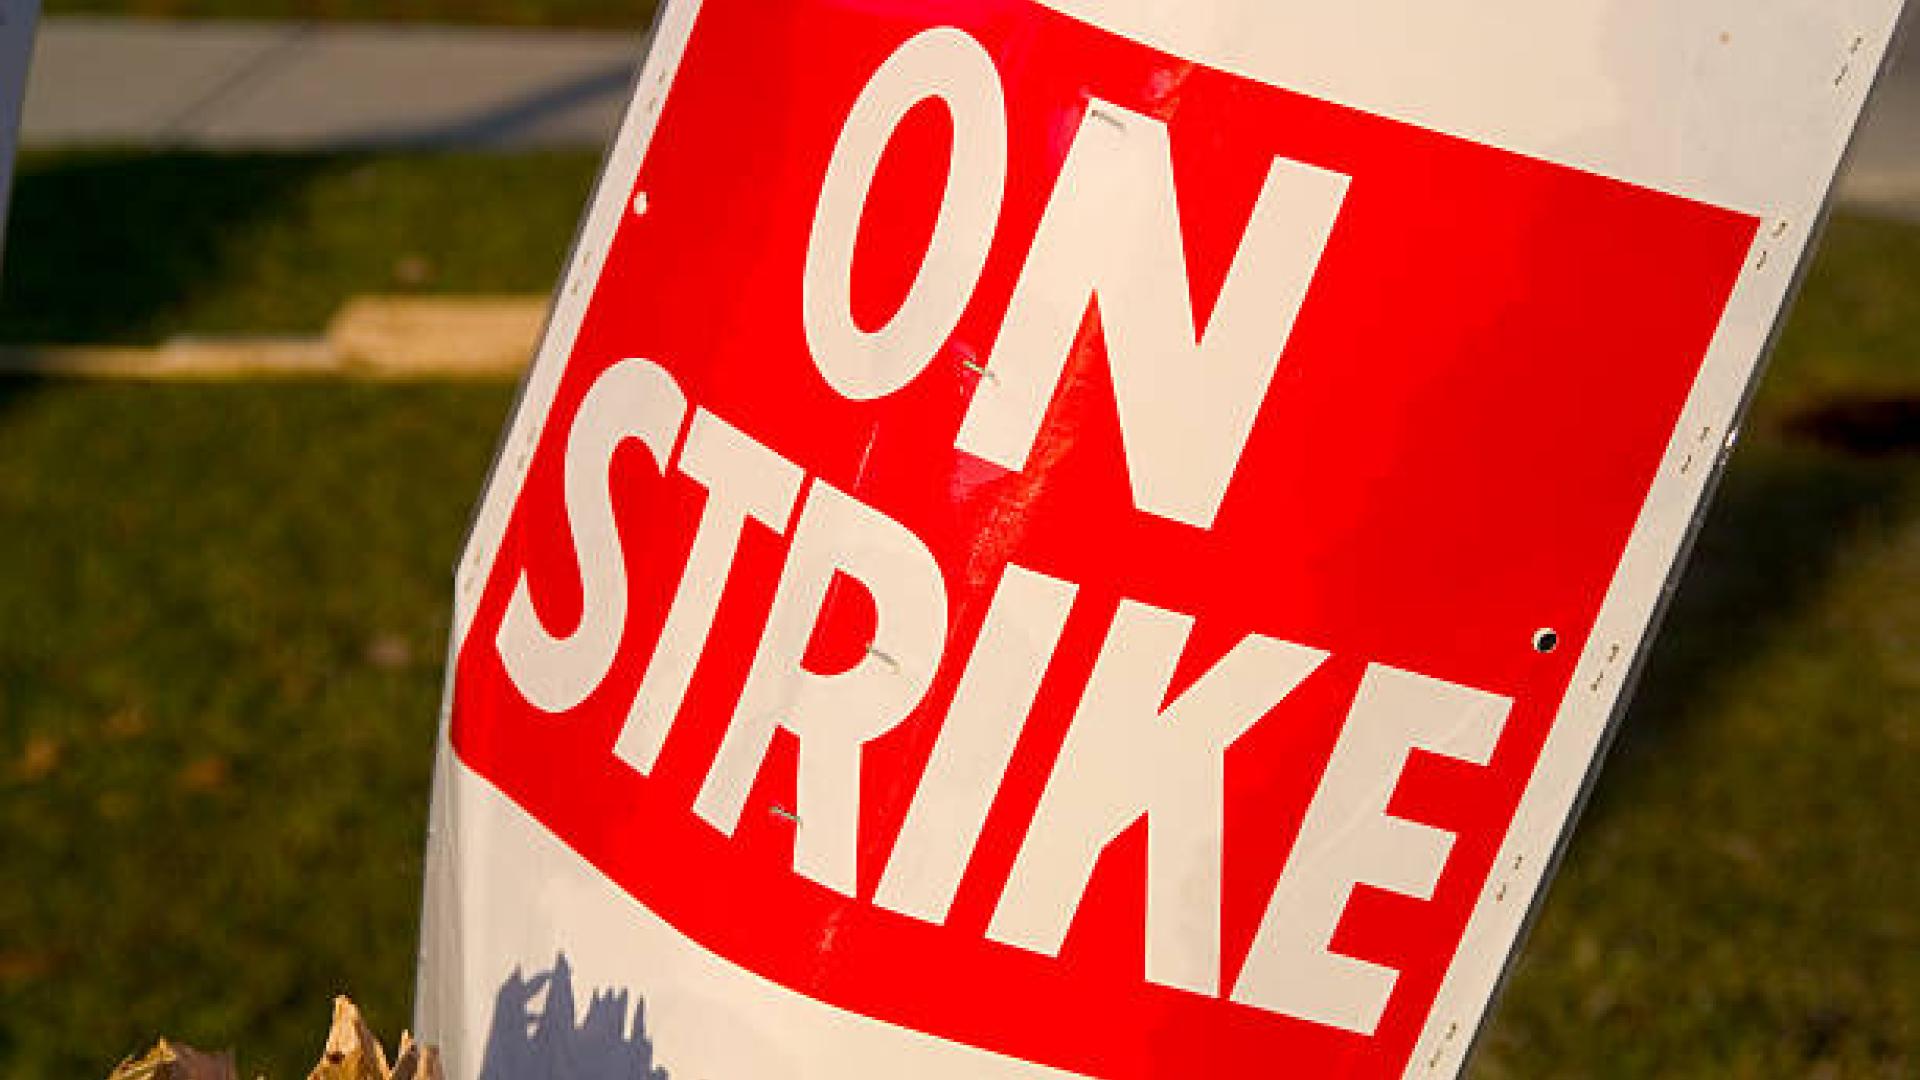 Sign which reads "ON STRIKE"